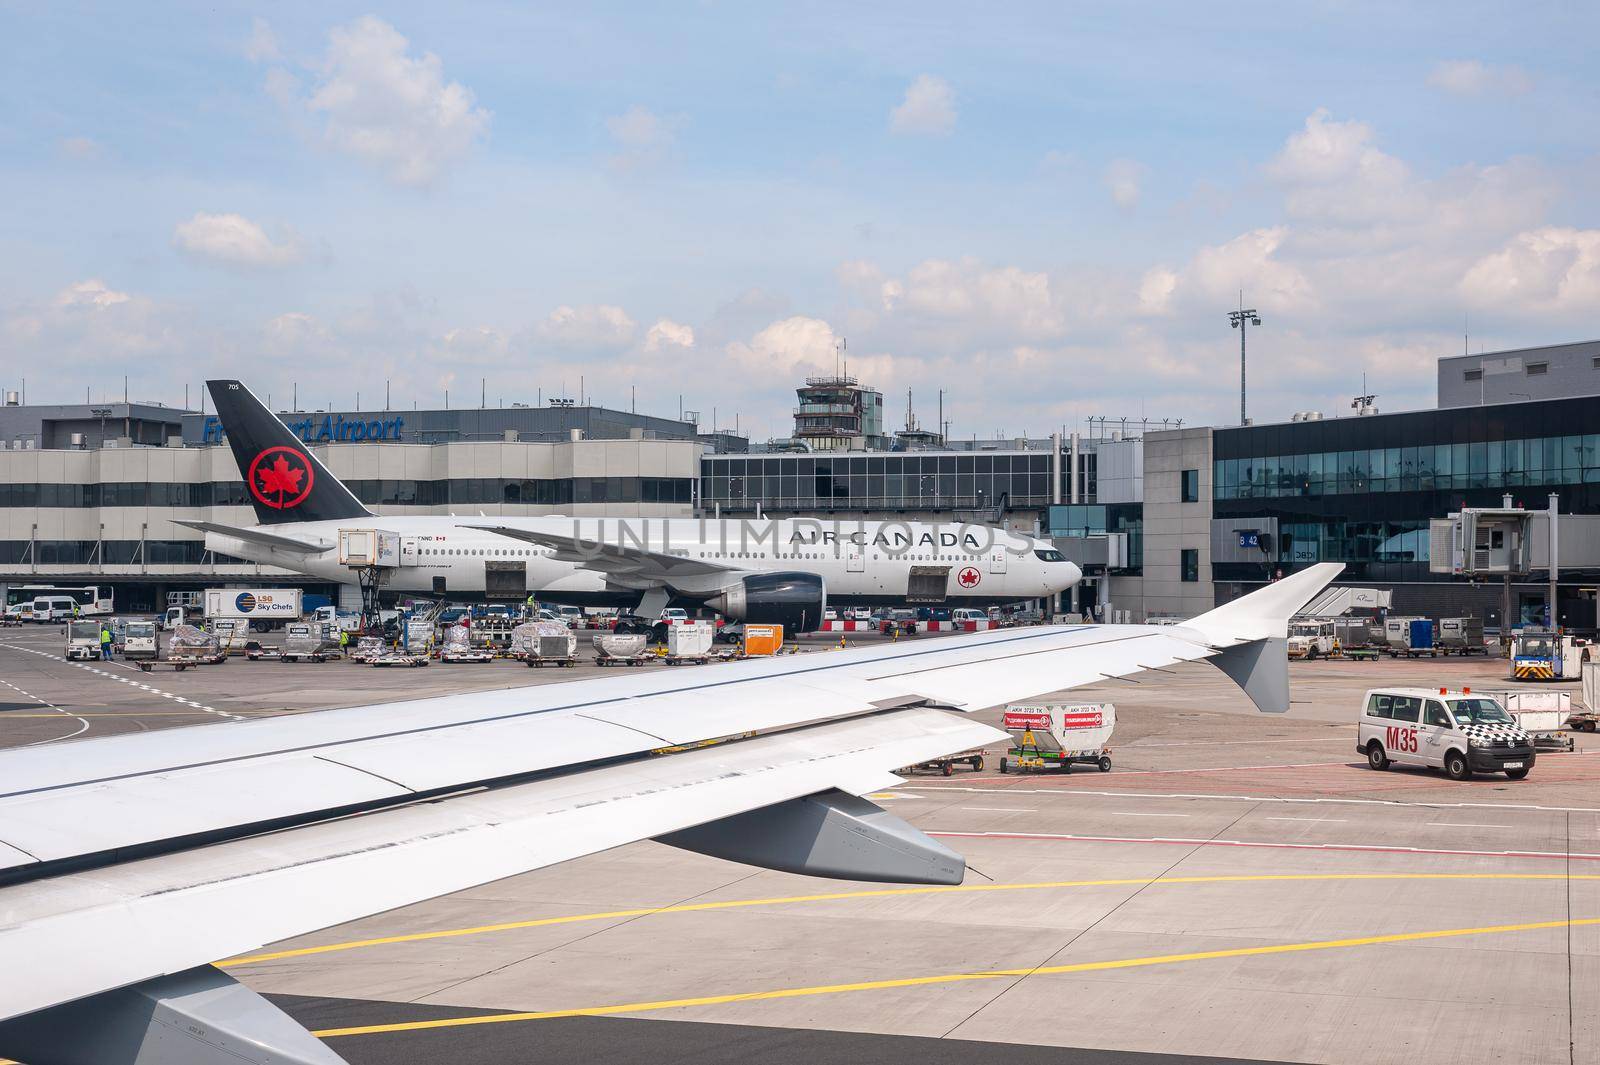 05/26/2019. Frankfurt Airport, Germany. Transatlantic Air Canada airplane in front of main terminal. Airport operated by Fraport and serves as the main hub for Lufthansa including Lufthansa City Line and Lufthansa Cargo.